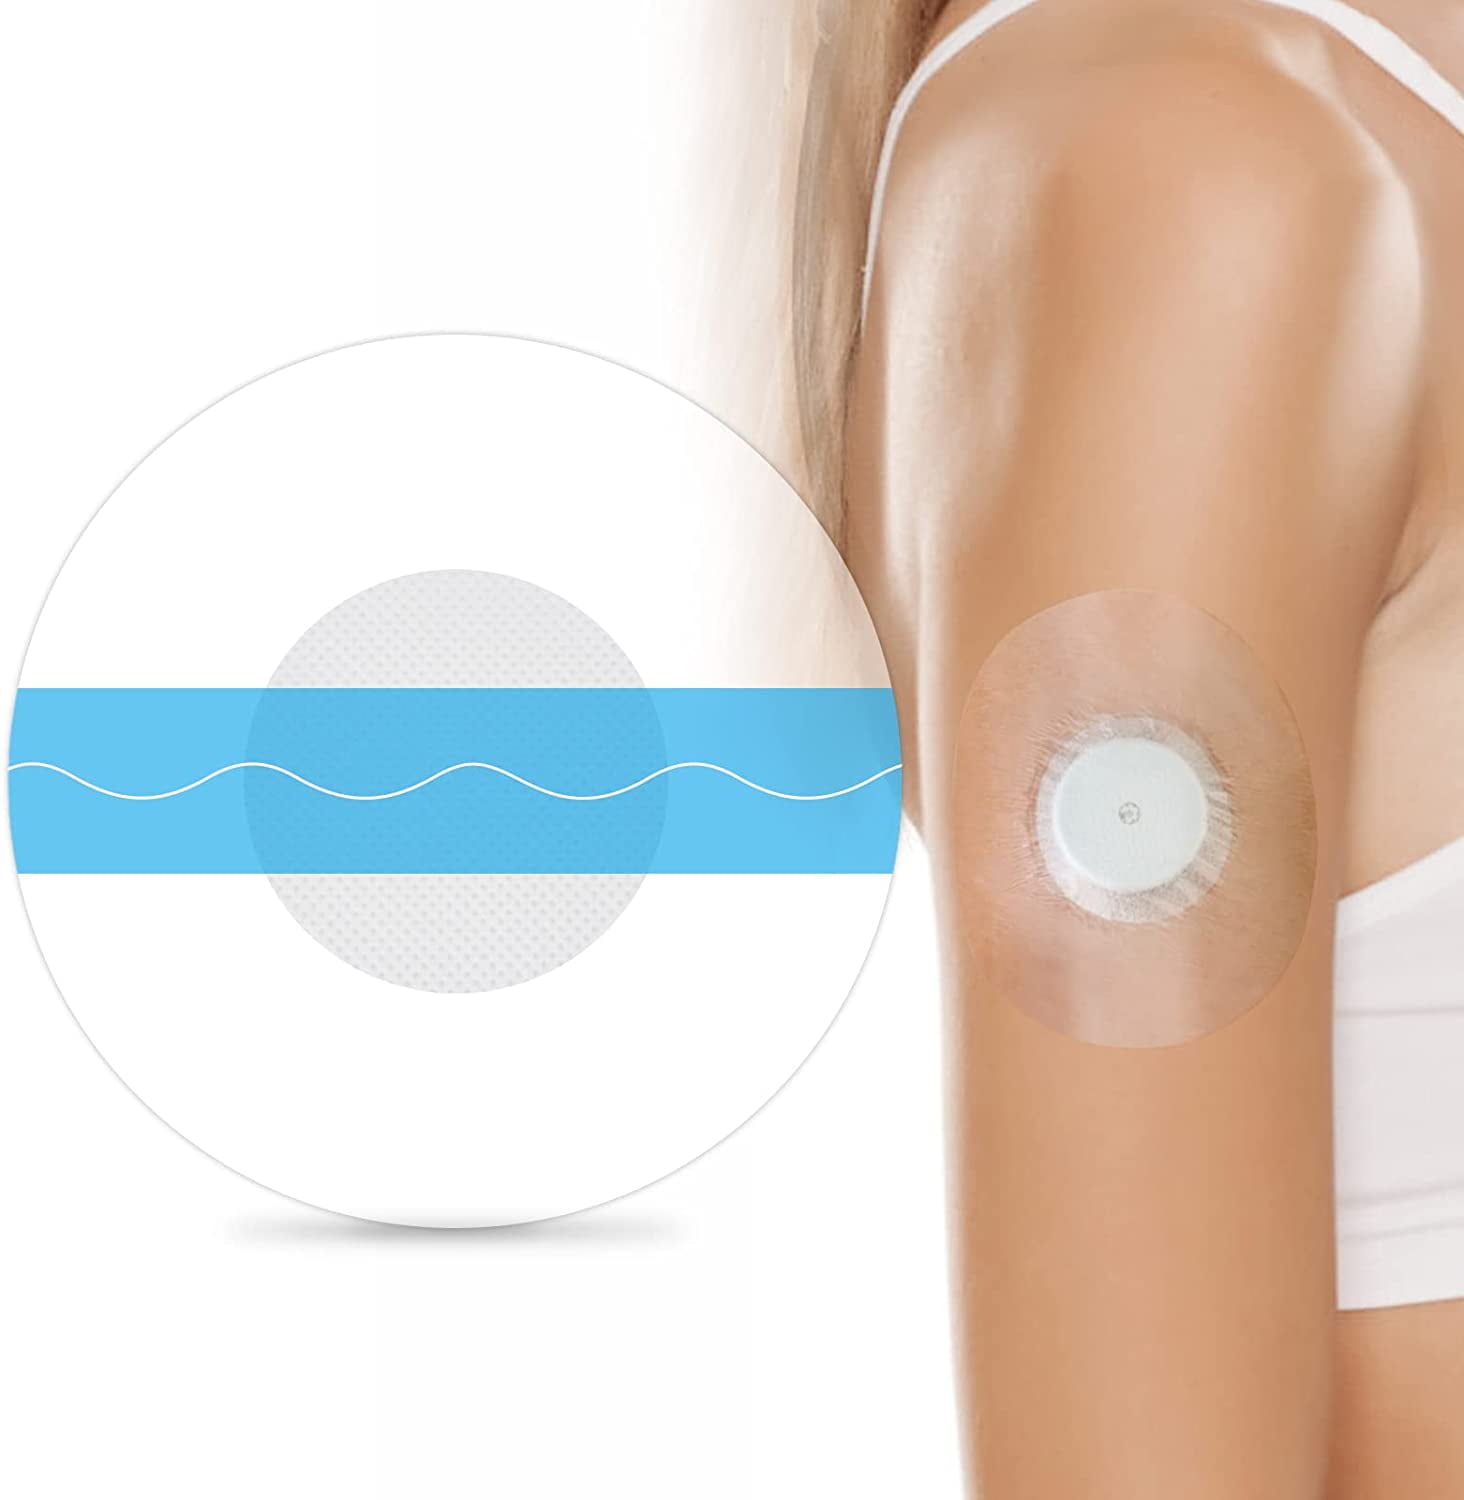 HONYOU Freestyle Adhesive Patches 25Pack Waterproof Libre2/3 Sensor Covers Flesh Flexible CGM Patches Without Glue in The Center-Enlite-Guardian-Freestyle